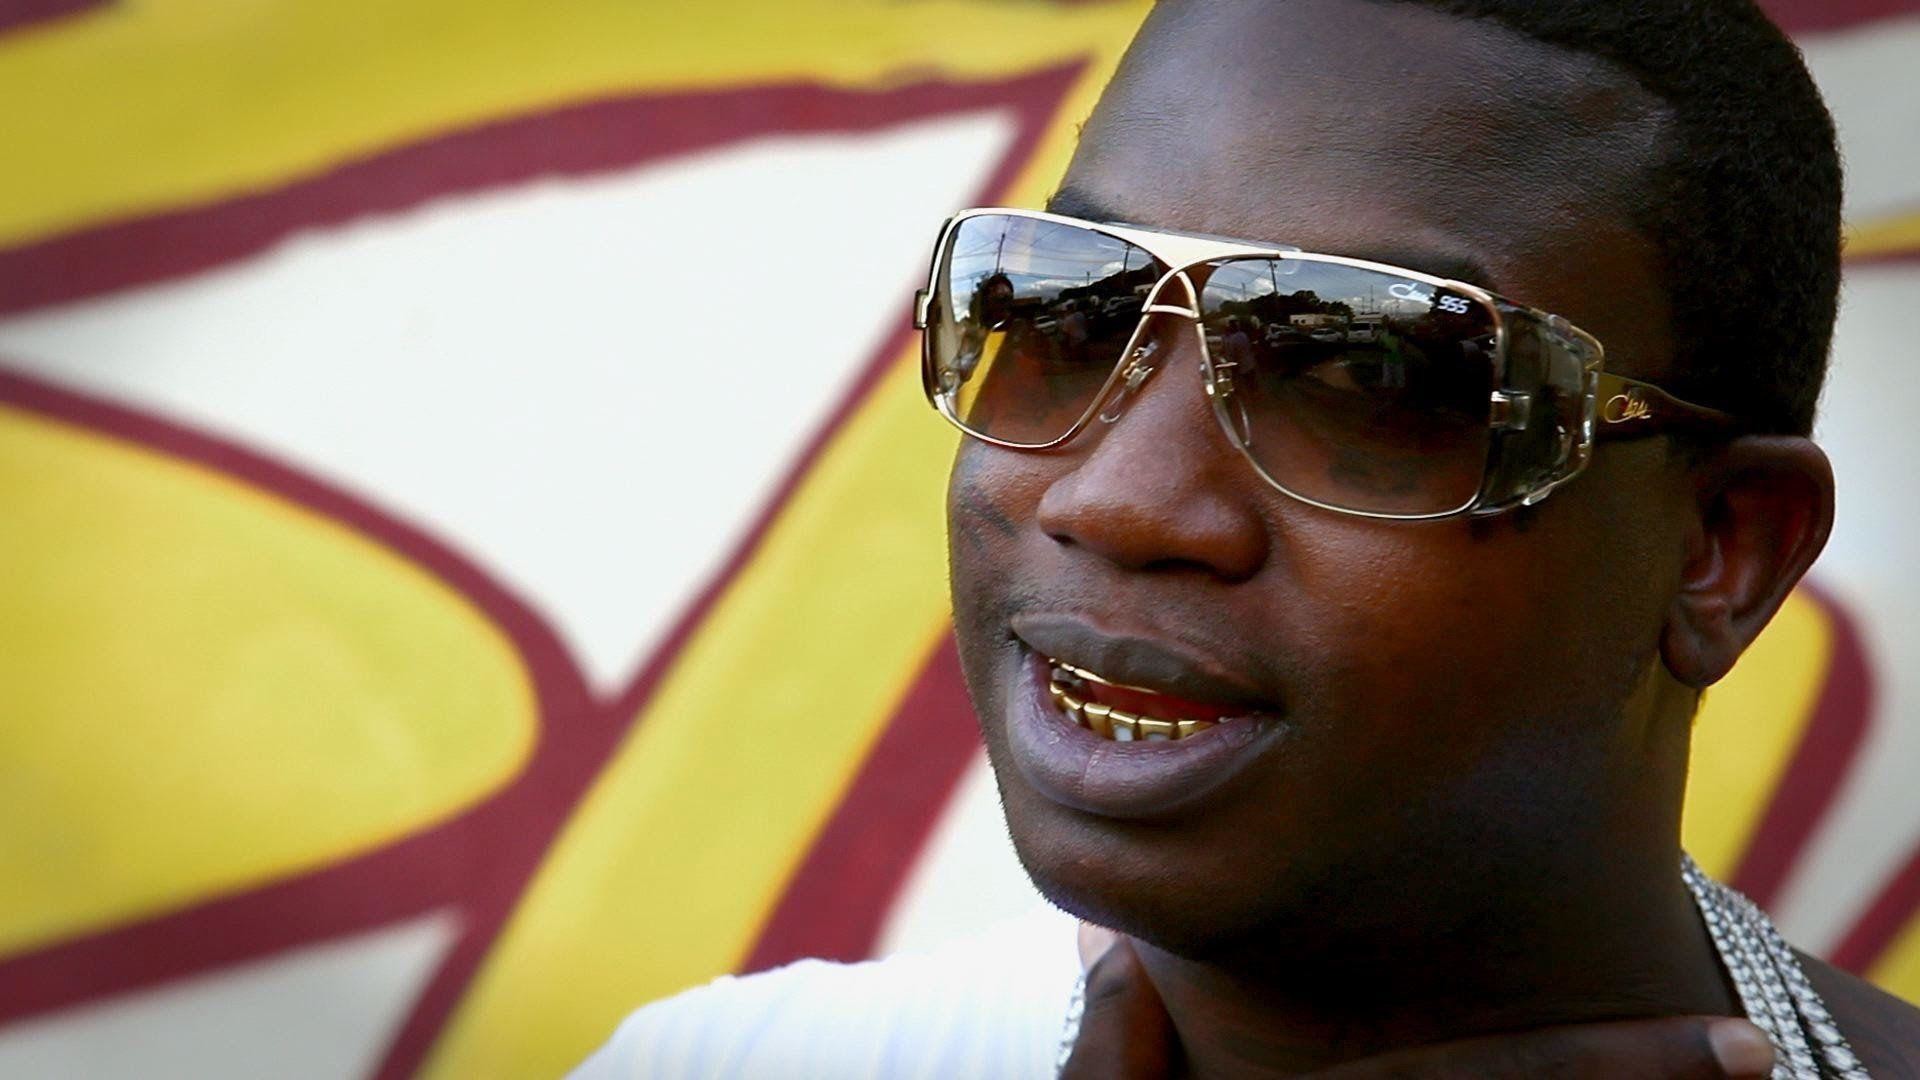 1920x1080 Gucci Mane HD Wallpapers | HD Wallpapers 360